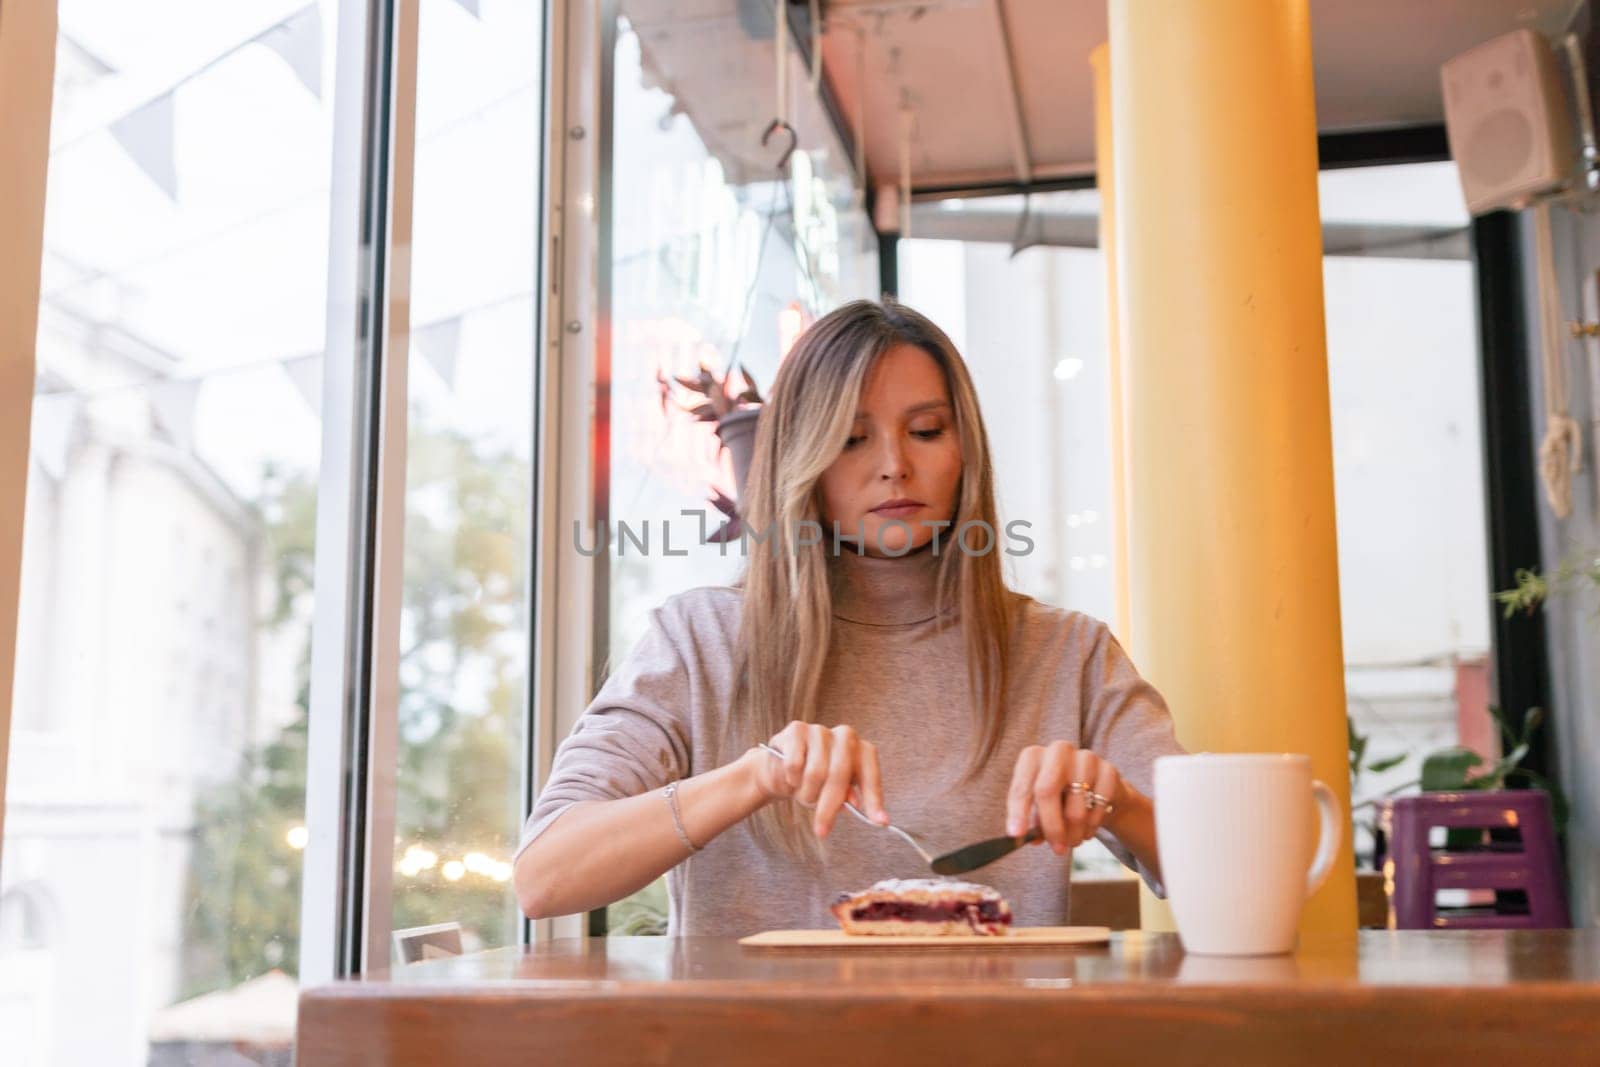 Woman with blonde hair sips cappuccino in a cafe. She is holding the glass up to her face, taking a sip of the drink